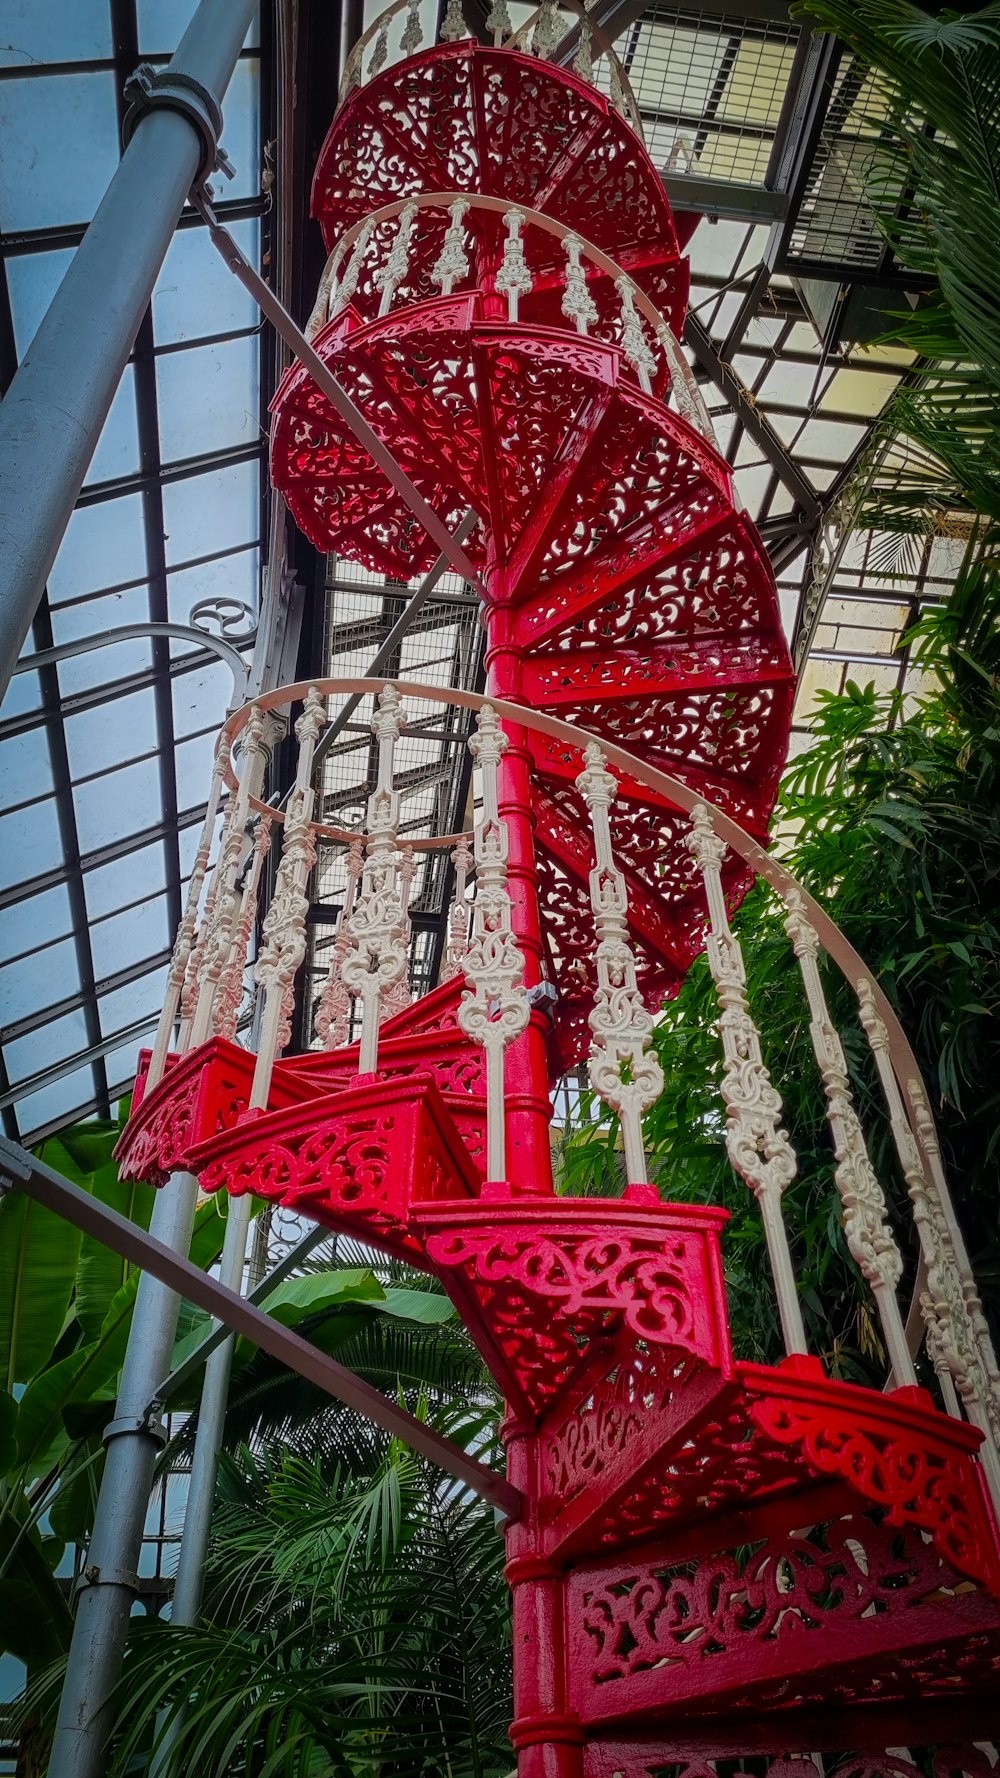 a red spiral staircase in a greenhouse